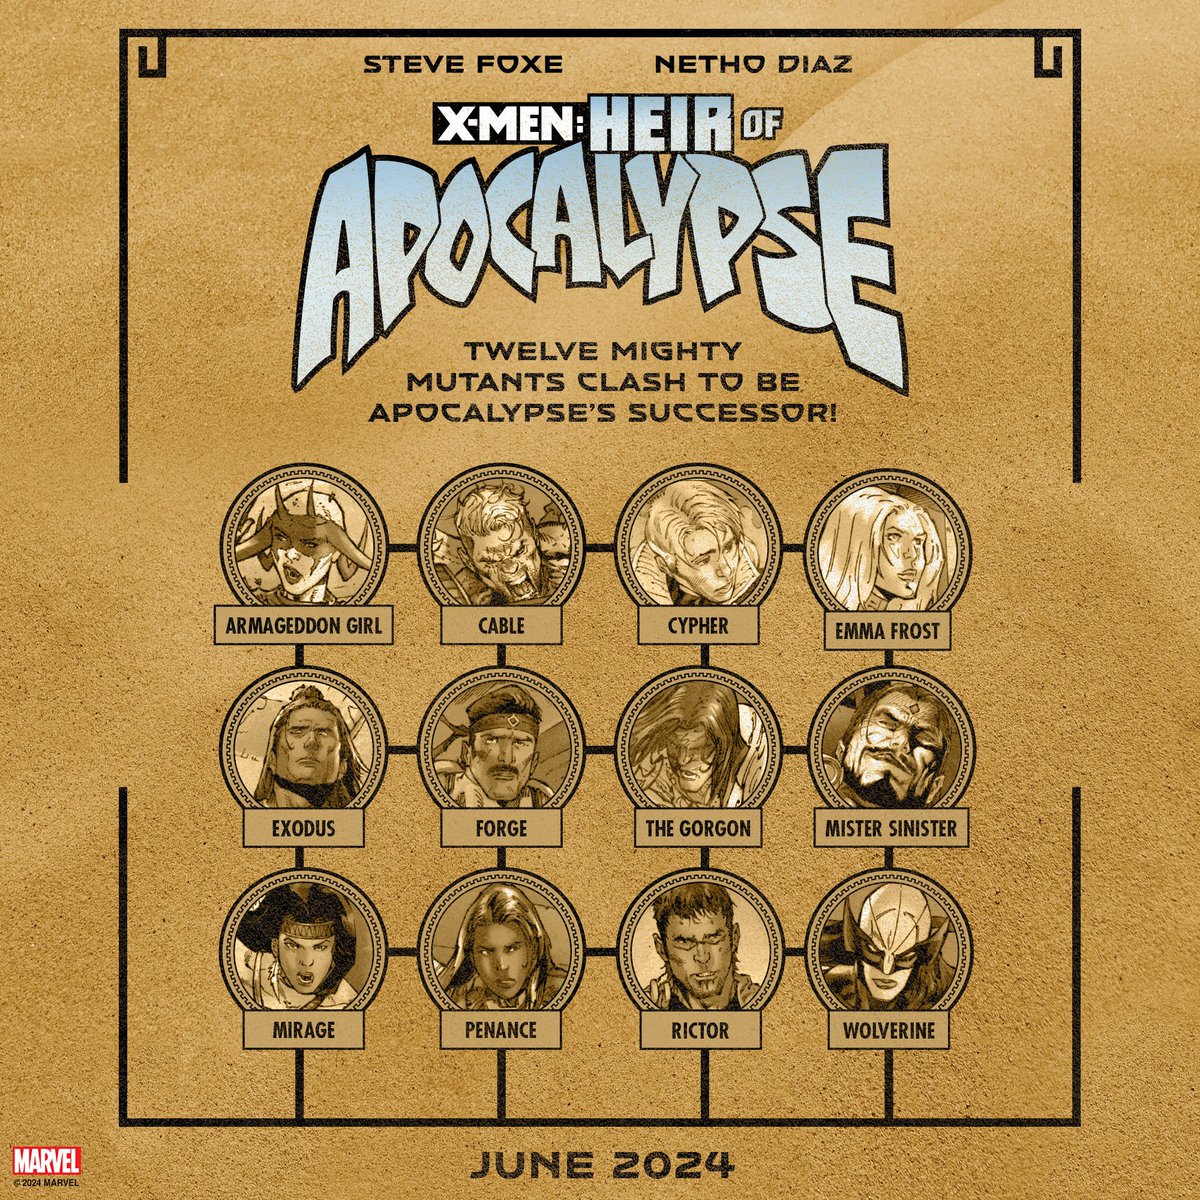 Who will be the #HeirOfApocalypse? Dropping in June from Steve Foxe and Netho Diaz (Credit: @marvel)! Who's your pick? #comics #marvel #xmen #marvelcomics @Nerd_Initiative